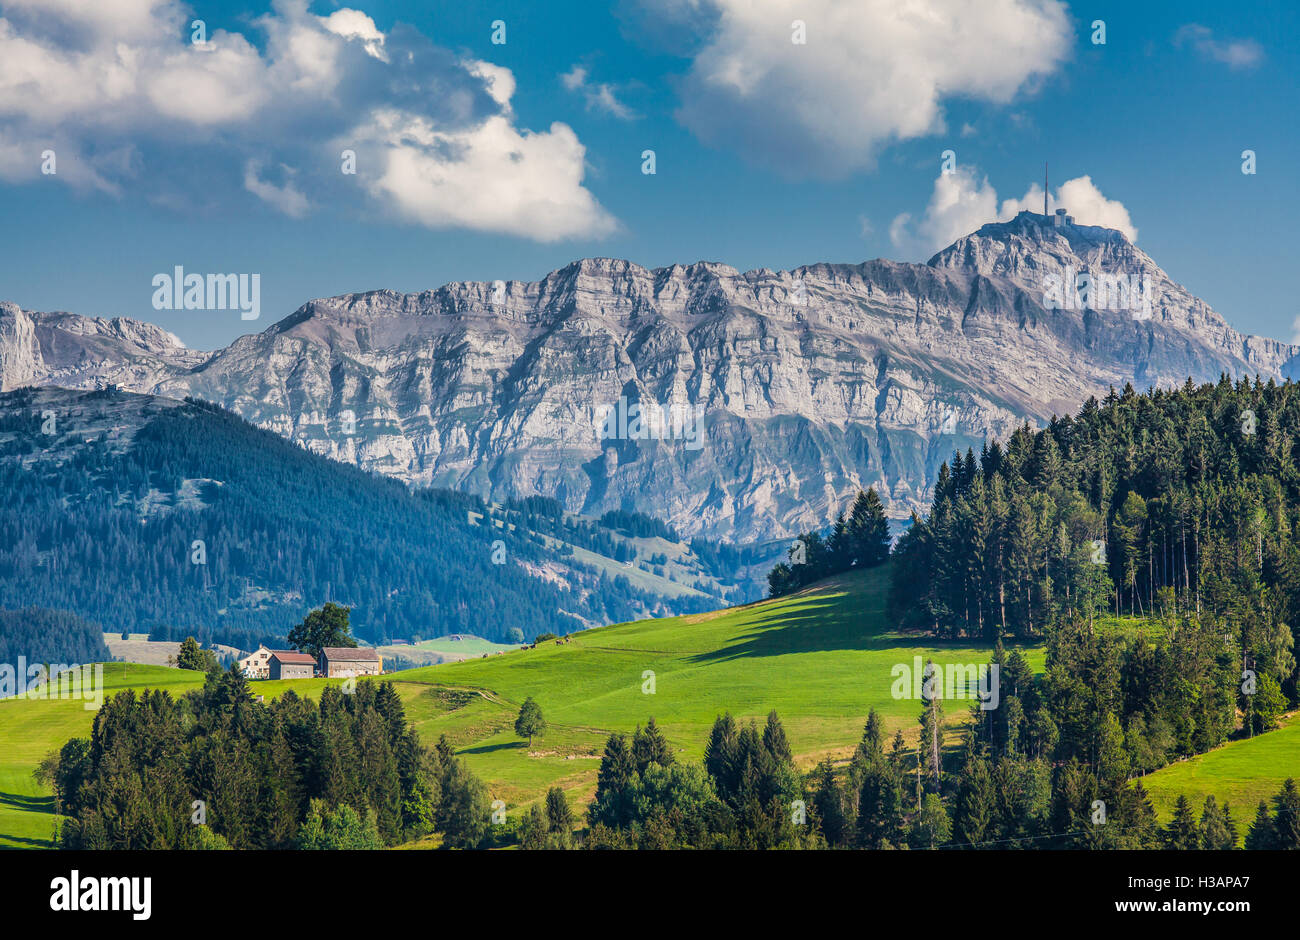 Idyllic landscape in the Alps with green meadows and famous Saentis mountain top in the background, Appenzellerland, Switzerland Stock Photo